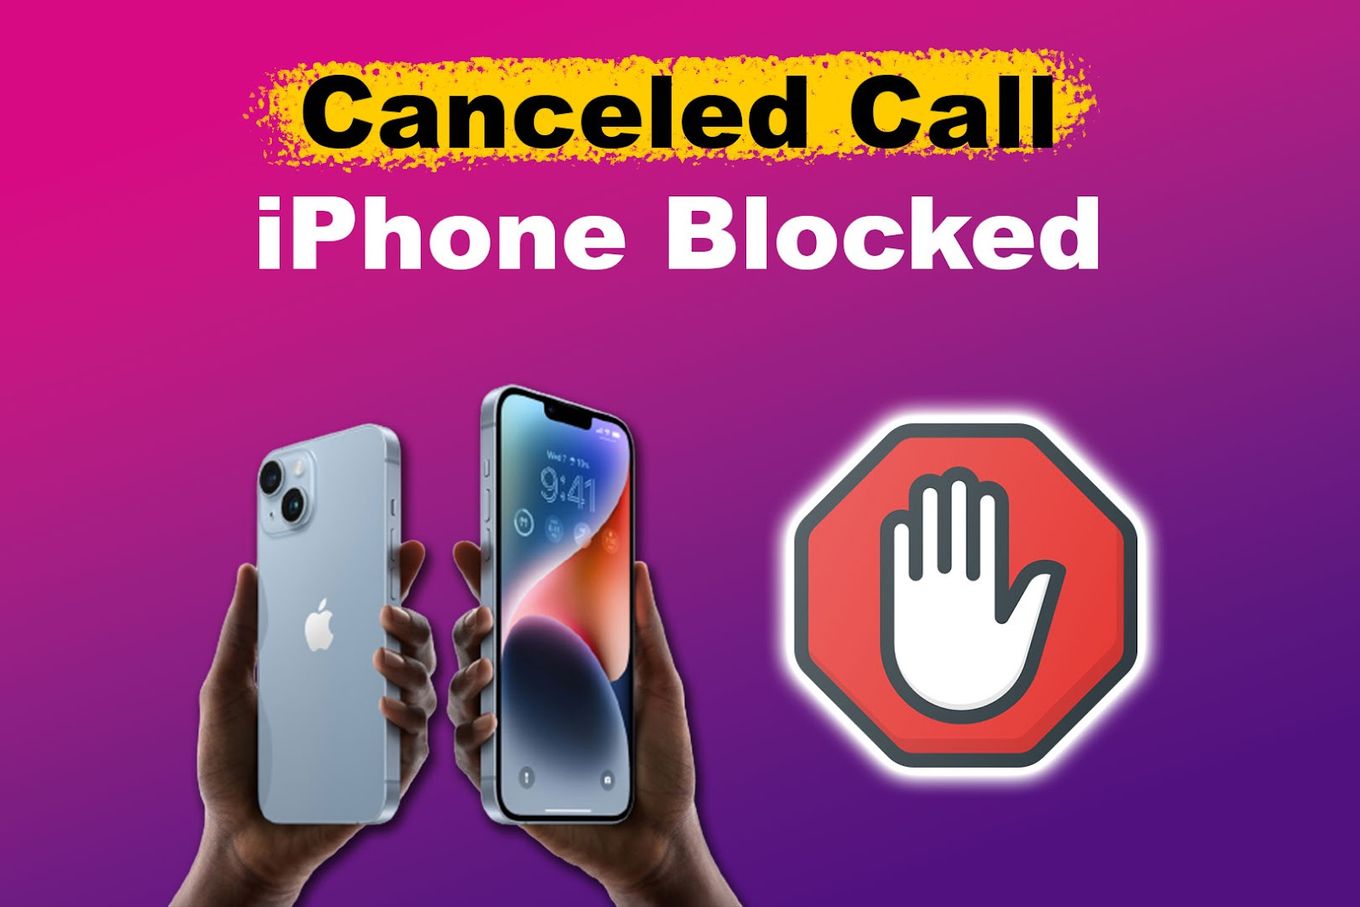 Cancelled Call iPhone Blocked